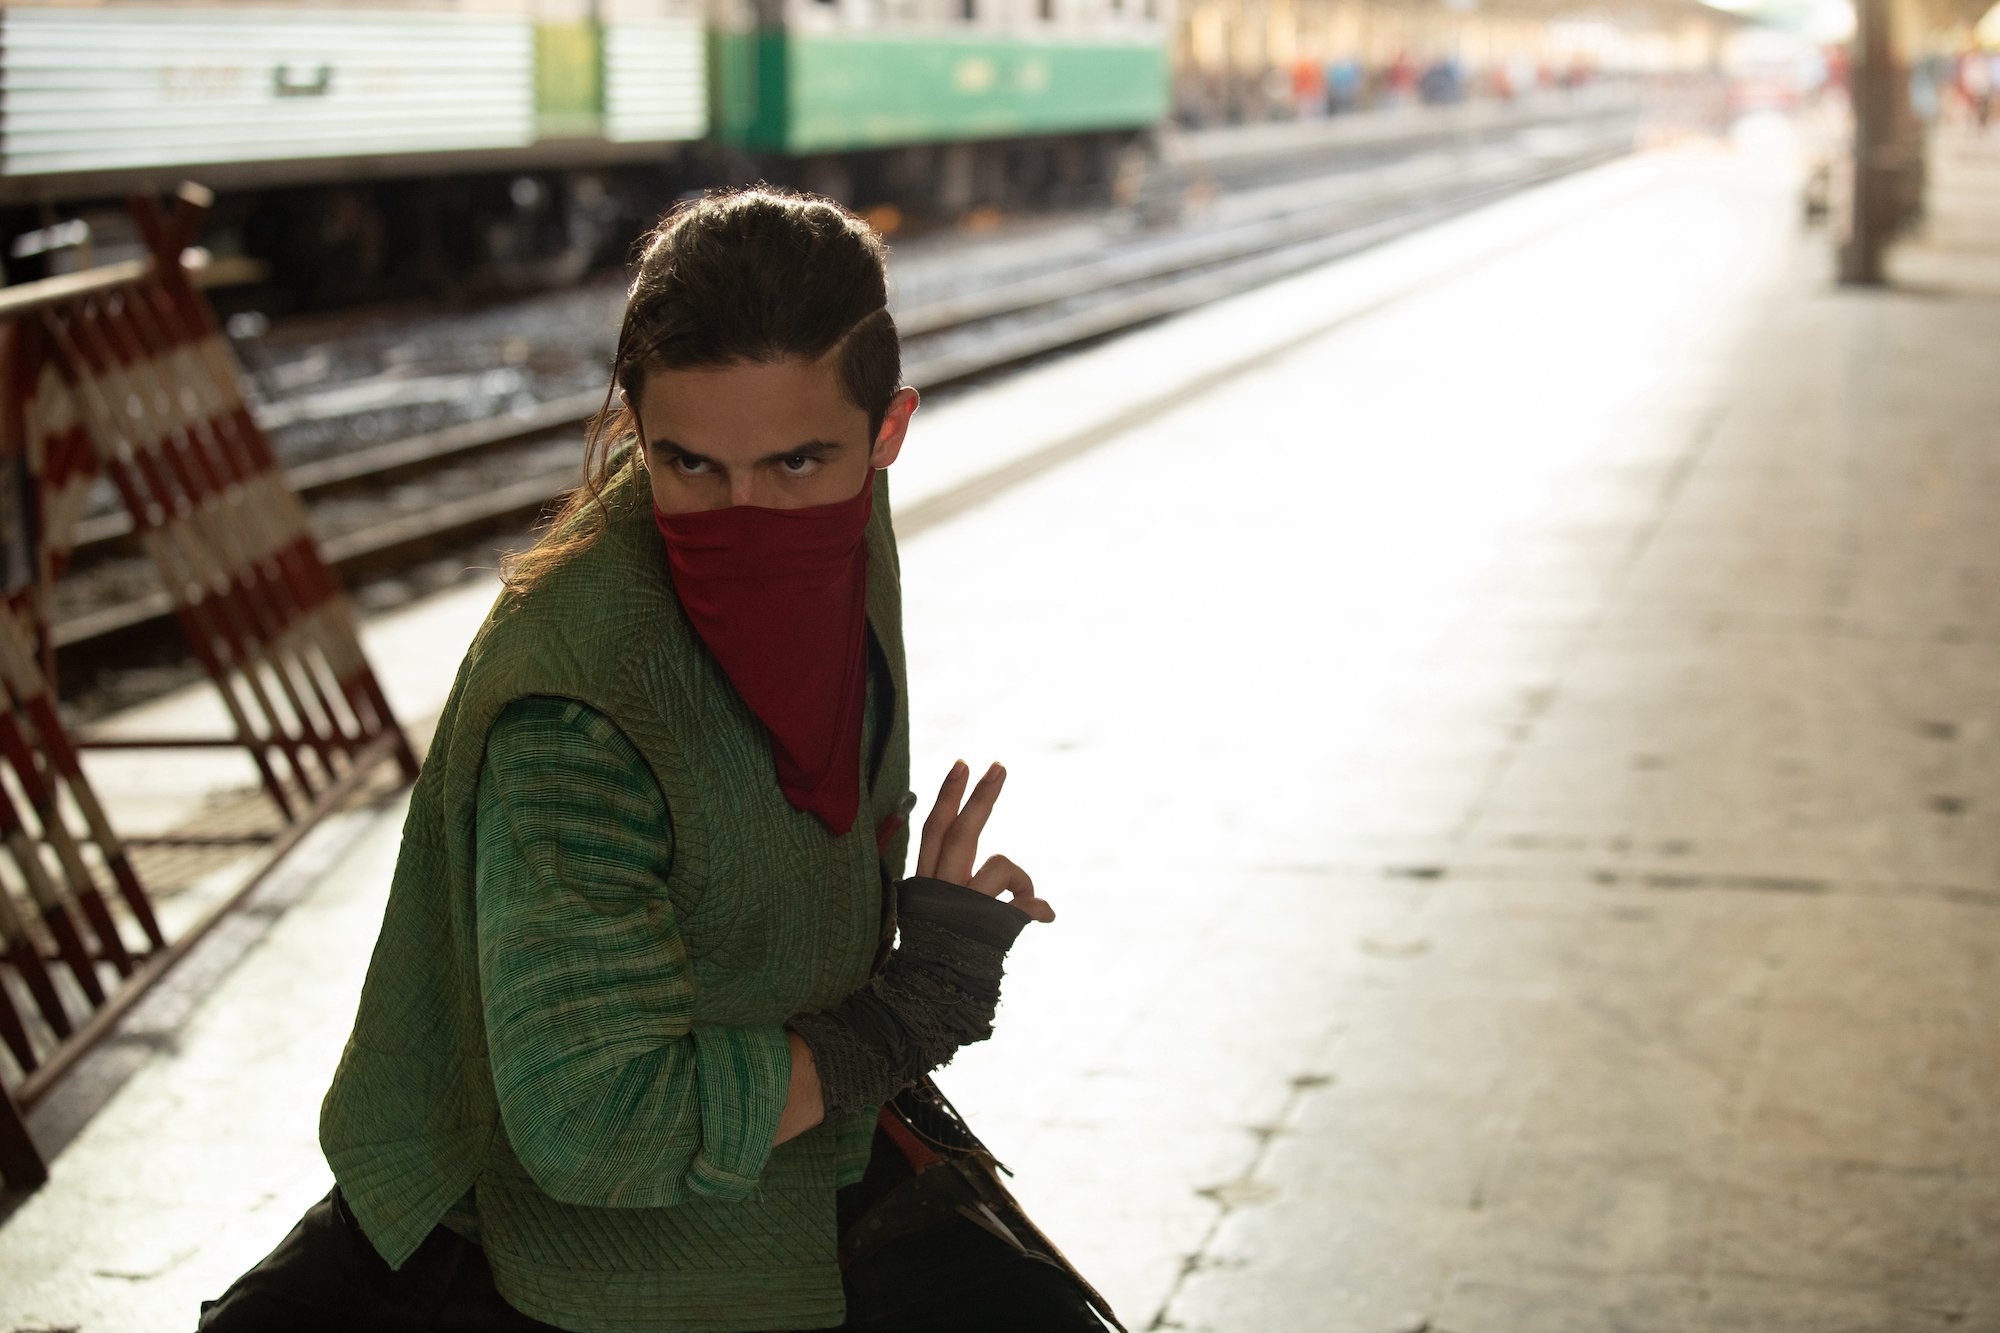 Aramis Knight, in character as Red Dagger in 'Ms. Marvel' Episode 4, wears a green vest over a green long-sleeved shirt and a red scarf around the lower half of his face.